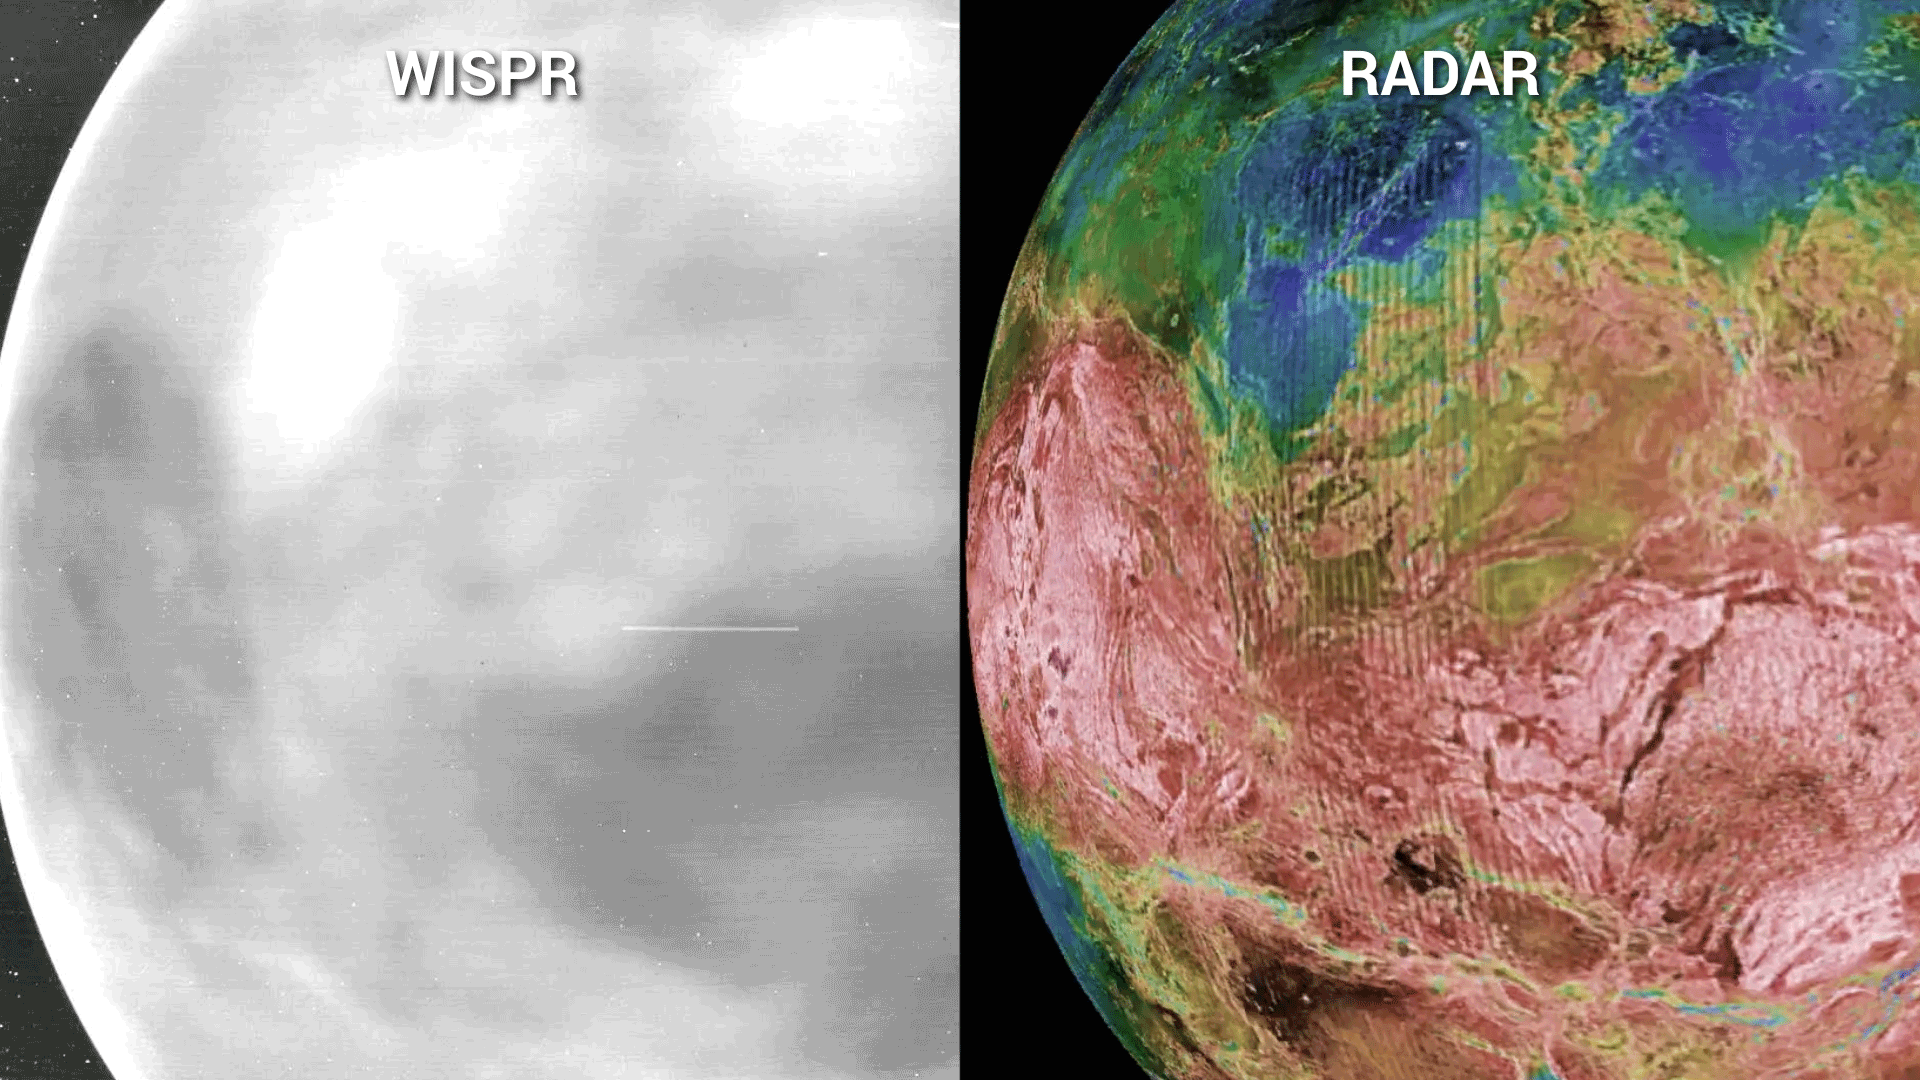 The Magellan mission mapped the surface of Venus with radar in the 1990s. The images gave the first global view of what was below Venus’ thick clouds. Surface features seen in the WISPR images (left) match ones seen in those from the Magellan mission (right).